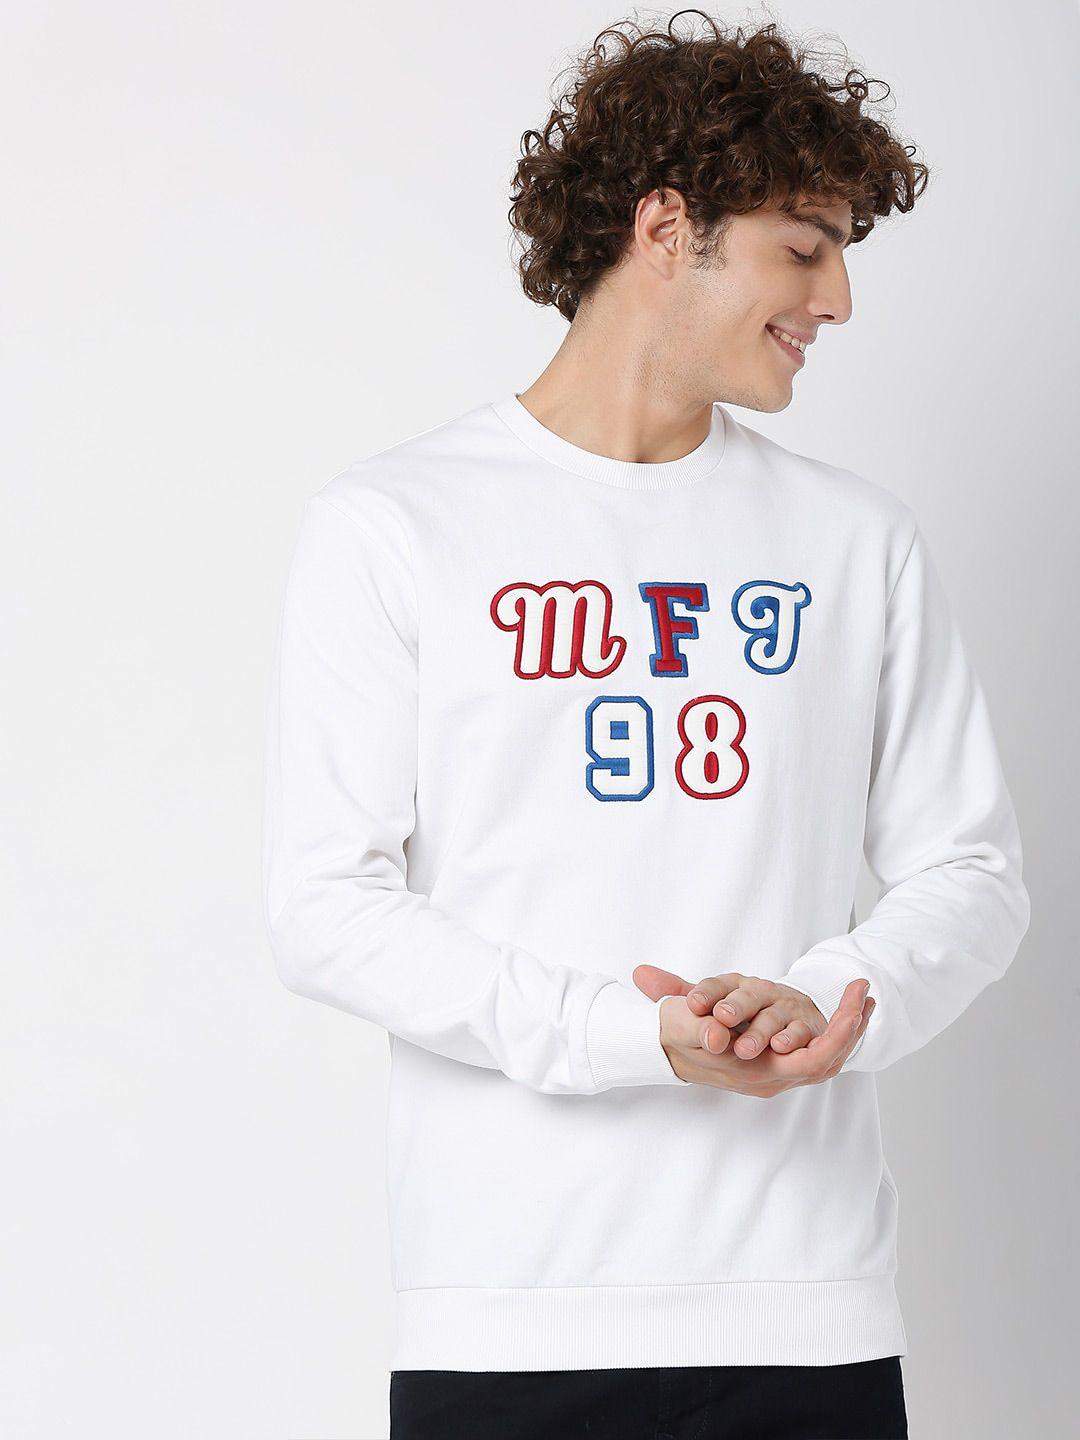 mufti embroidered slim fit full sleeves pure cotton sweatshirt